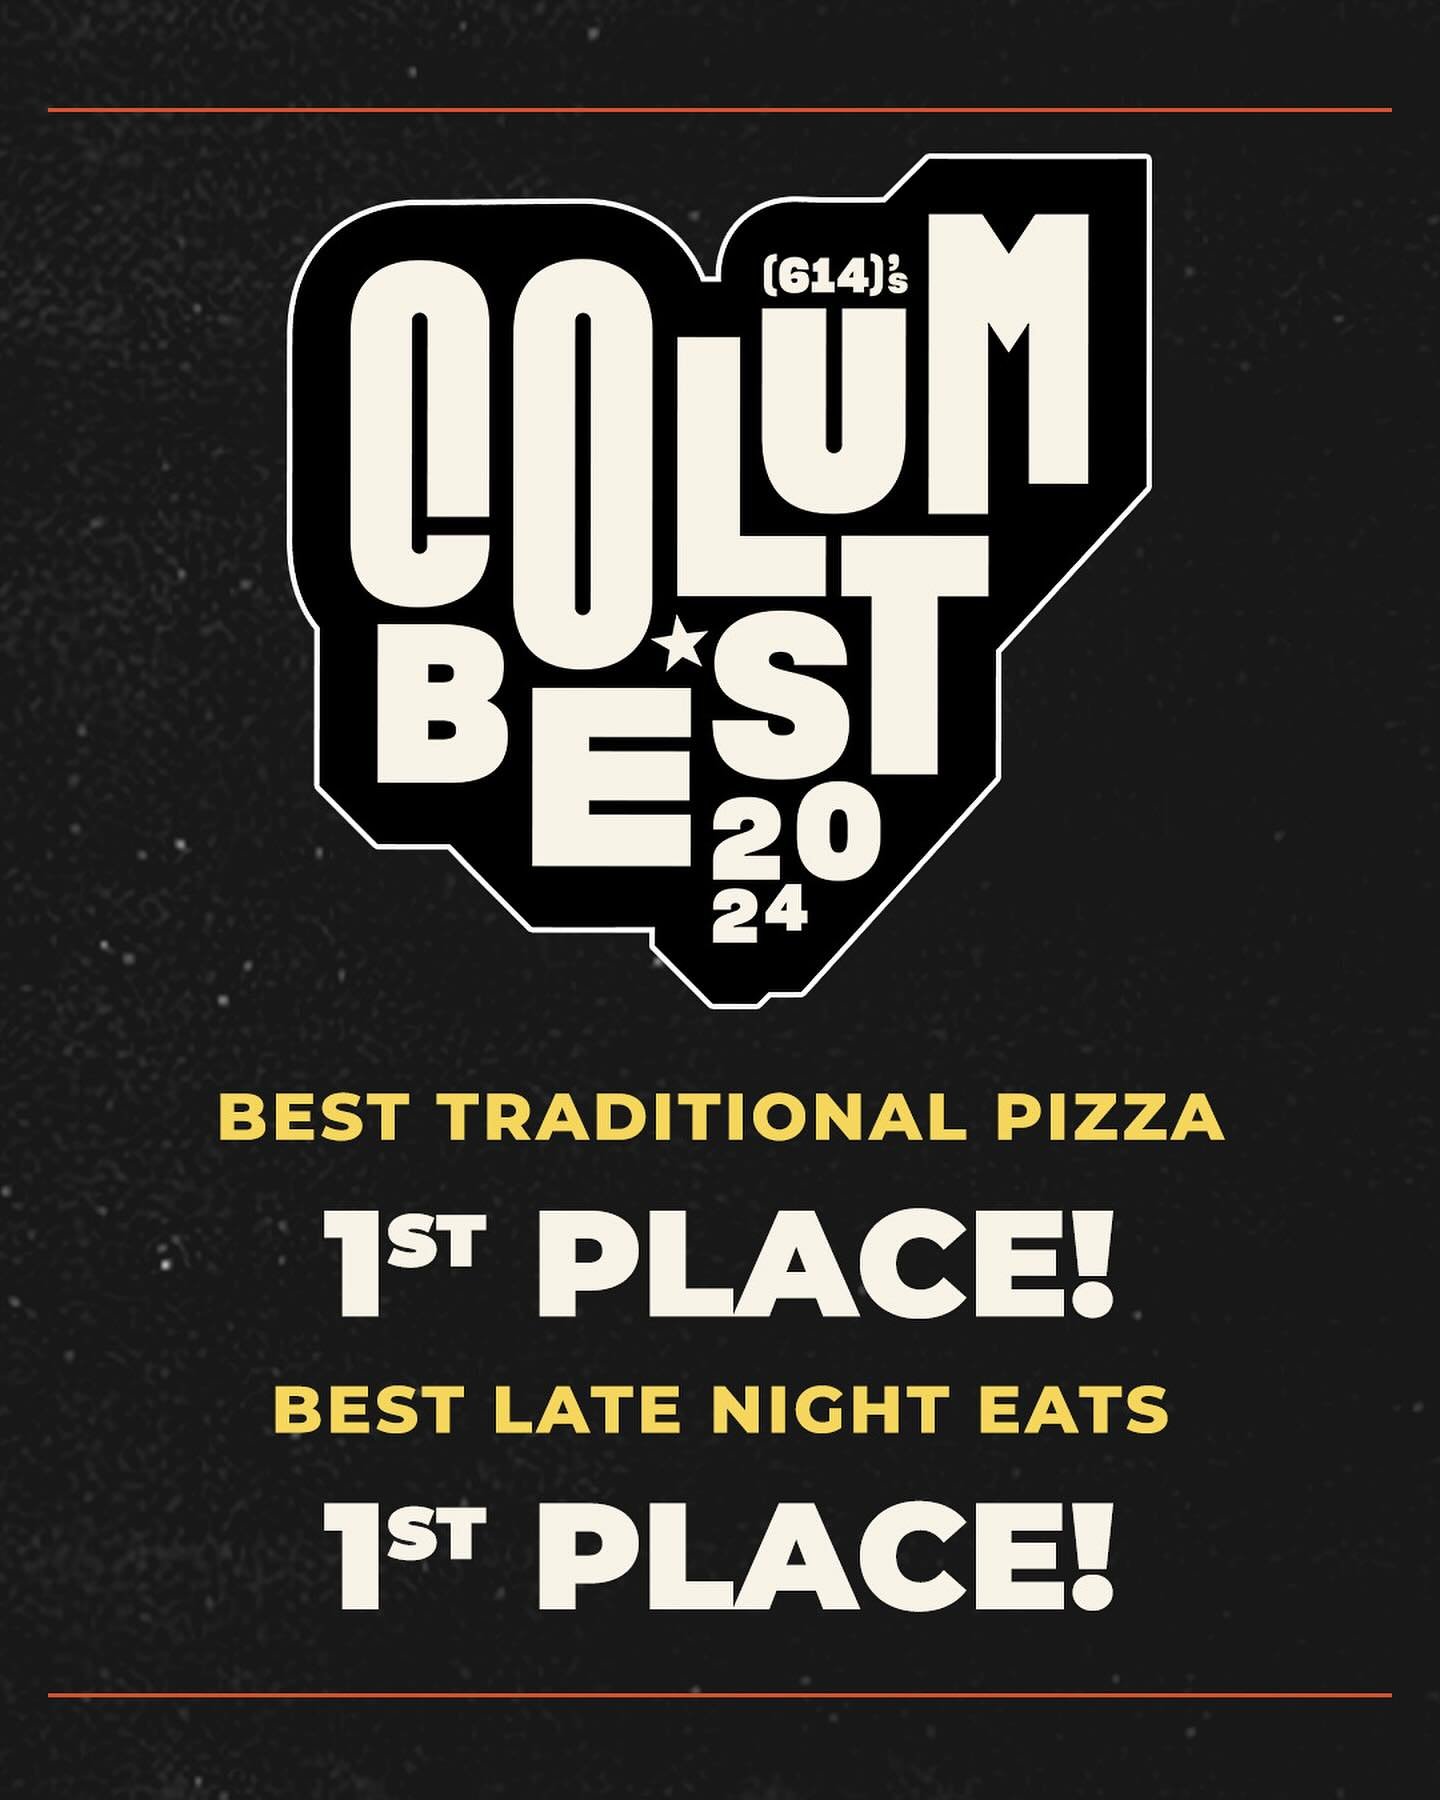 THANK YOU COLUMBUS! Our raving fans have spoken once again and voted us the NO. 1 ColumBEST Traditional Pizza and Late Night Eats!! It&rsquo;s an honor to serve this incredible community year after year and we cannot wait to expand our reach even fur